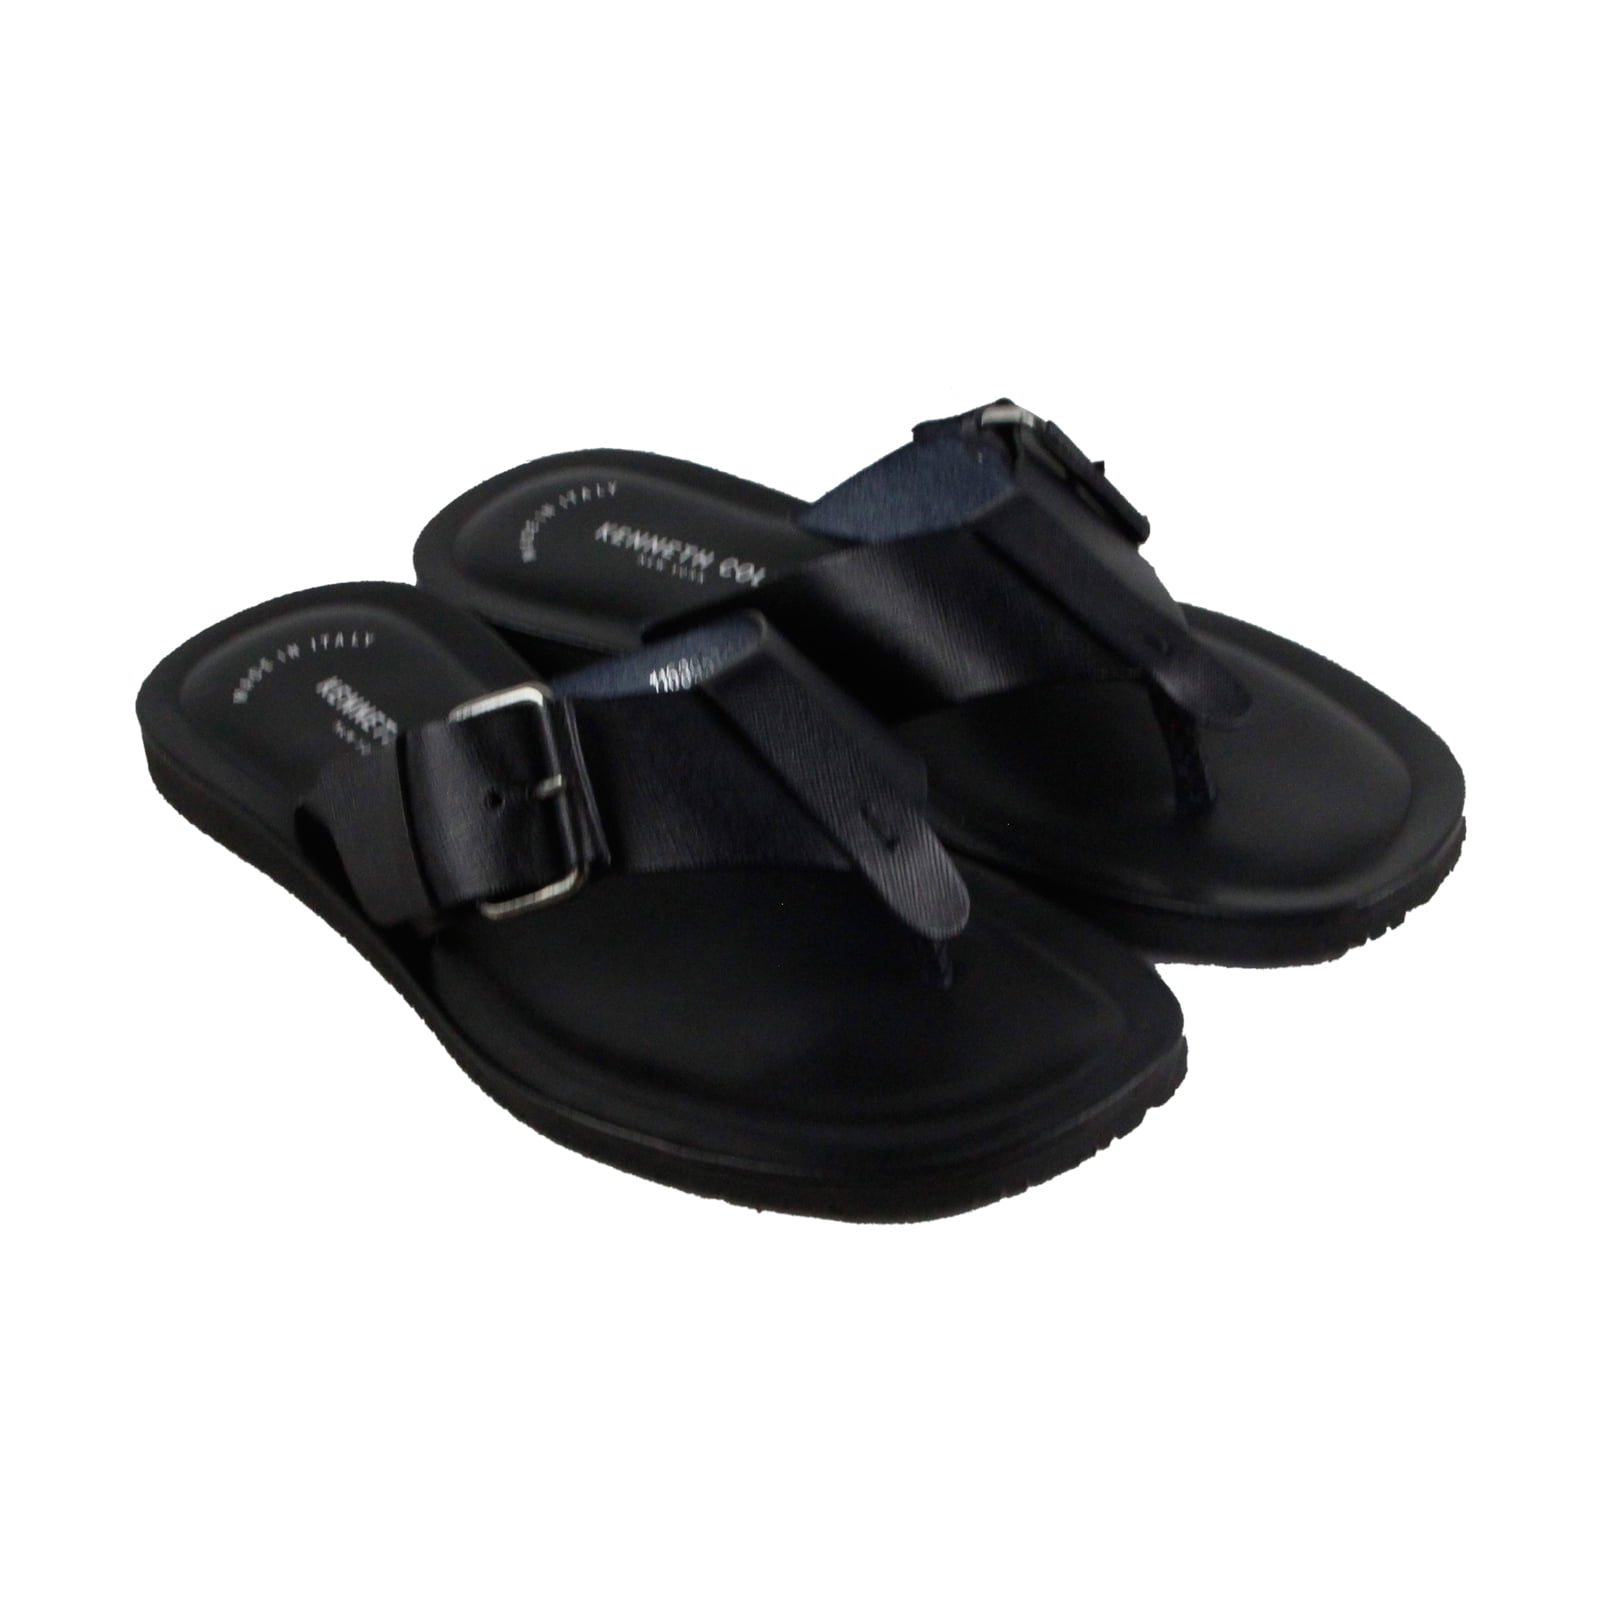 kenneth cole men's sandals leather